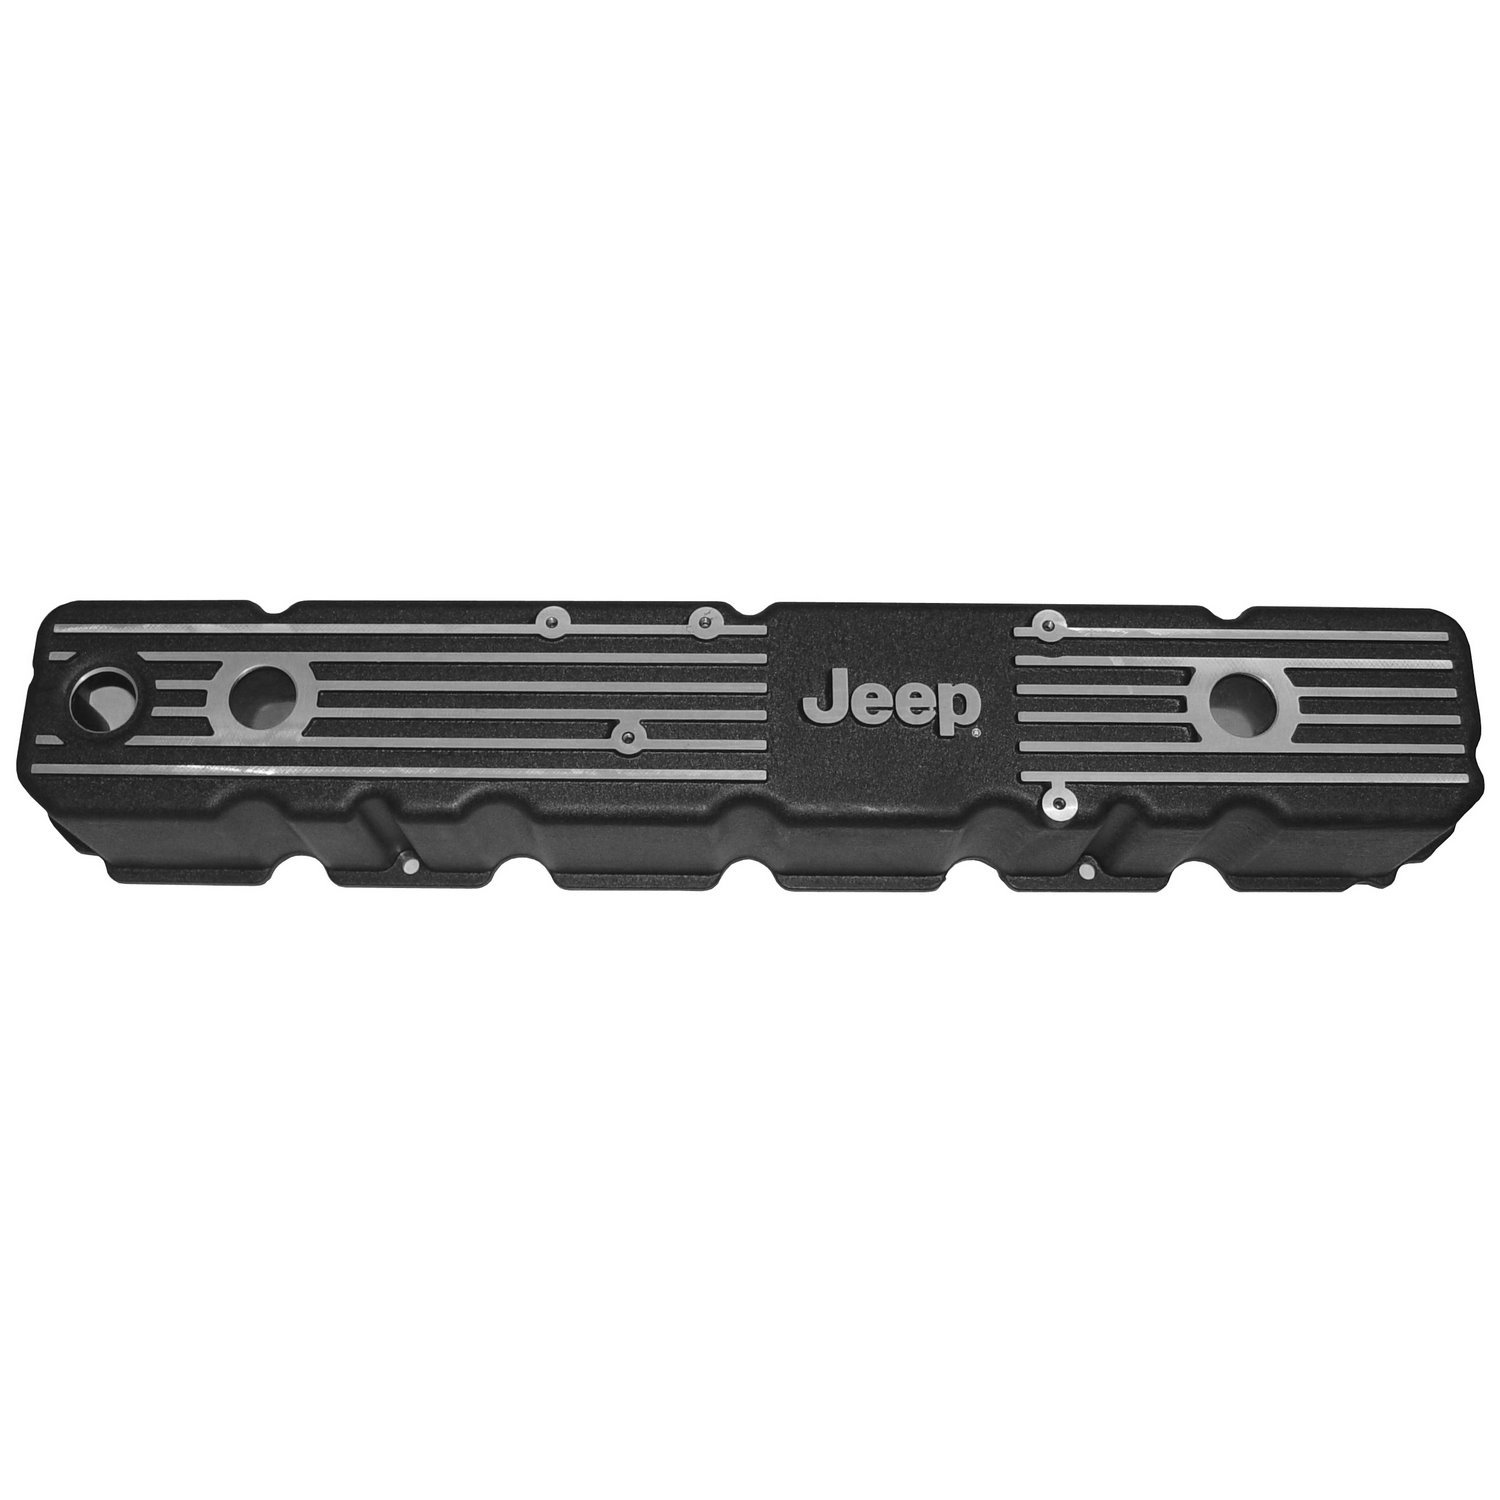 This licensed Mopar 4.2 aluminum valve cover has the Jeep logo and is powdercoated black for 81-86 J